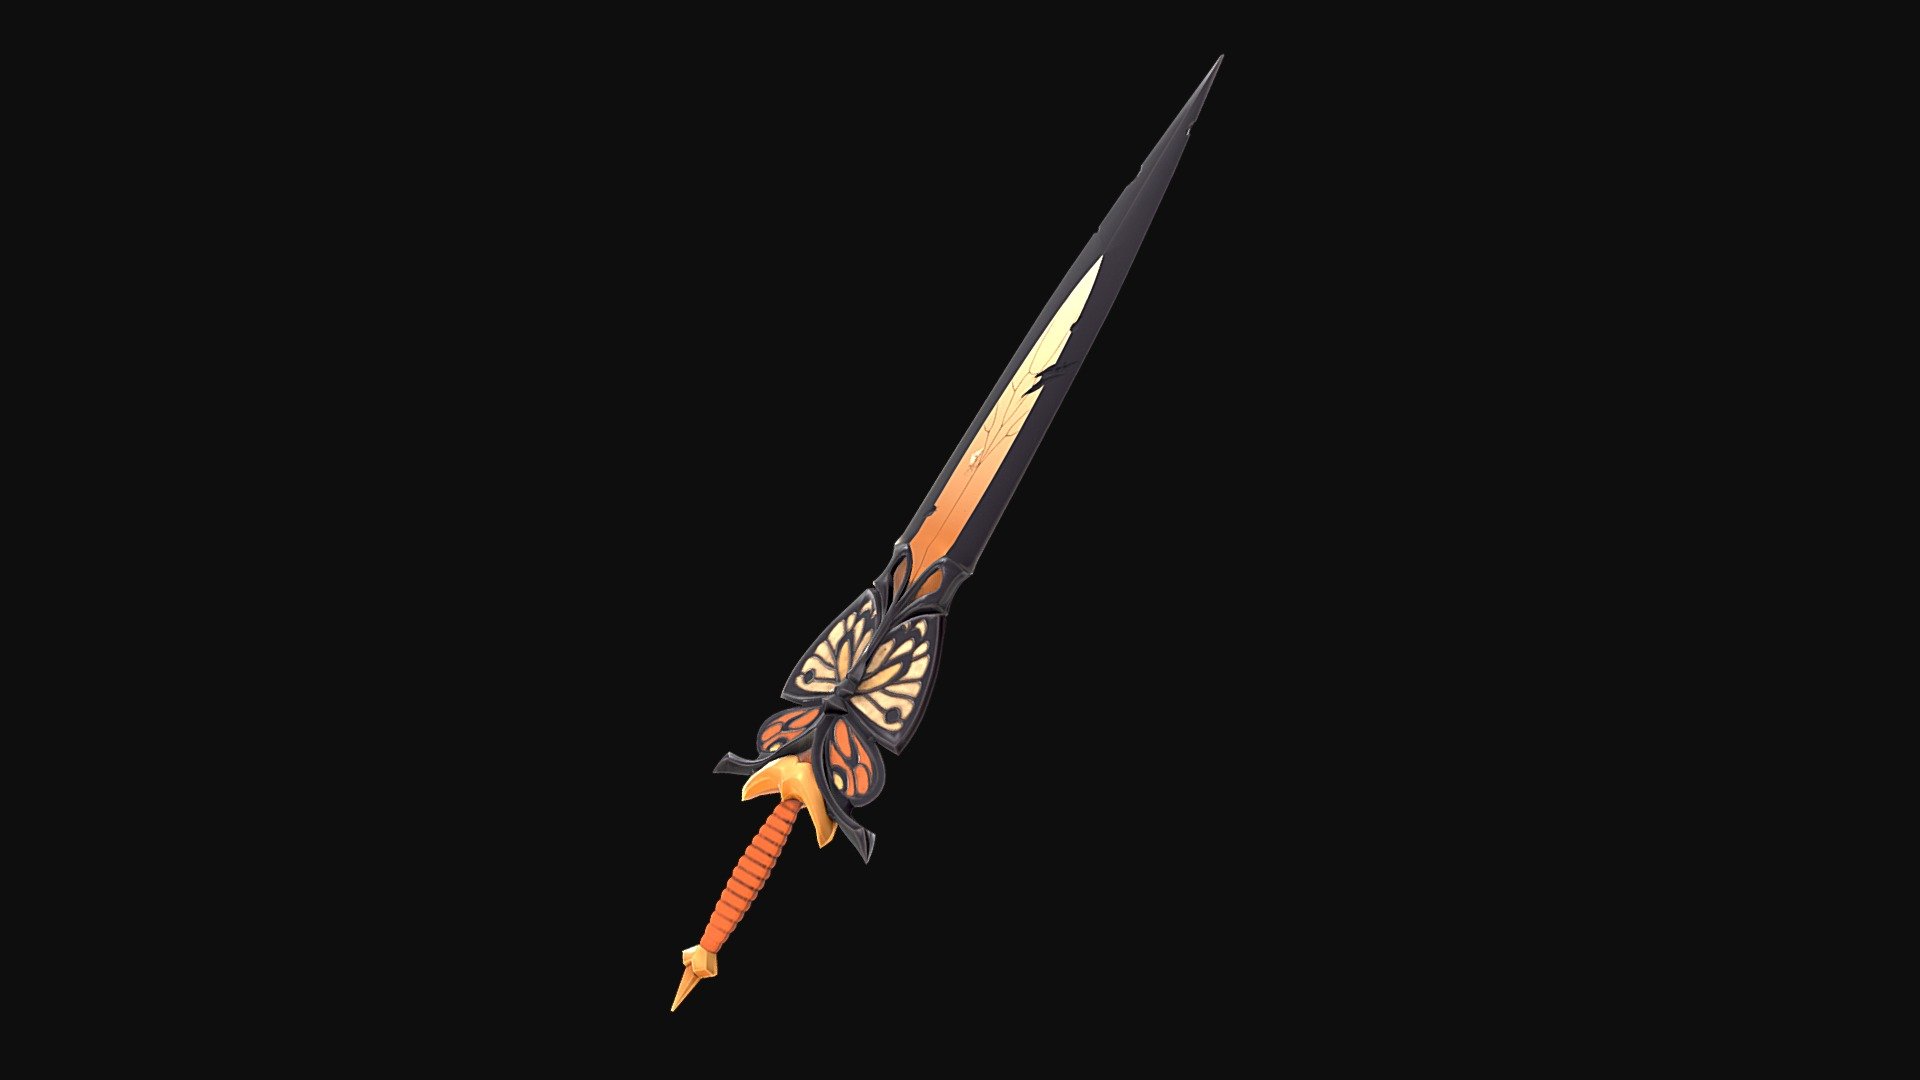 Original Artwork by Moniek Schilder: https://www.artstation.com/artwork/9mG6my

I saw this beautiful sword design by Moniek Schilder here on Artstation and felt immediately drawn to it. I knew I wanted to try a modeling a weapon while still exploring a stylized texturing technique. I hope I did Moniek's design justice!

There are multiple things I'm pleased with on this project and multiple things I hope to resolve better in the future. One thing I'm particularly proud of is the damaged portion of the flat part of the blade, which I actually &ldquo;painted